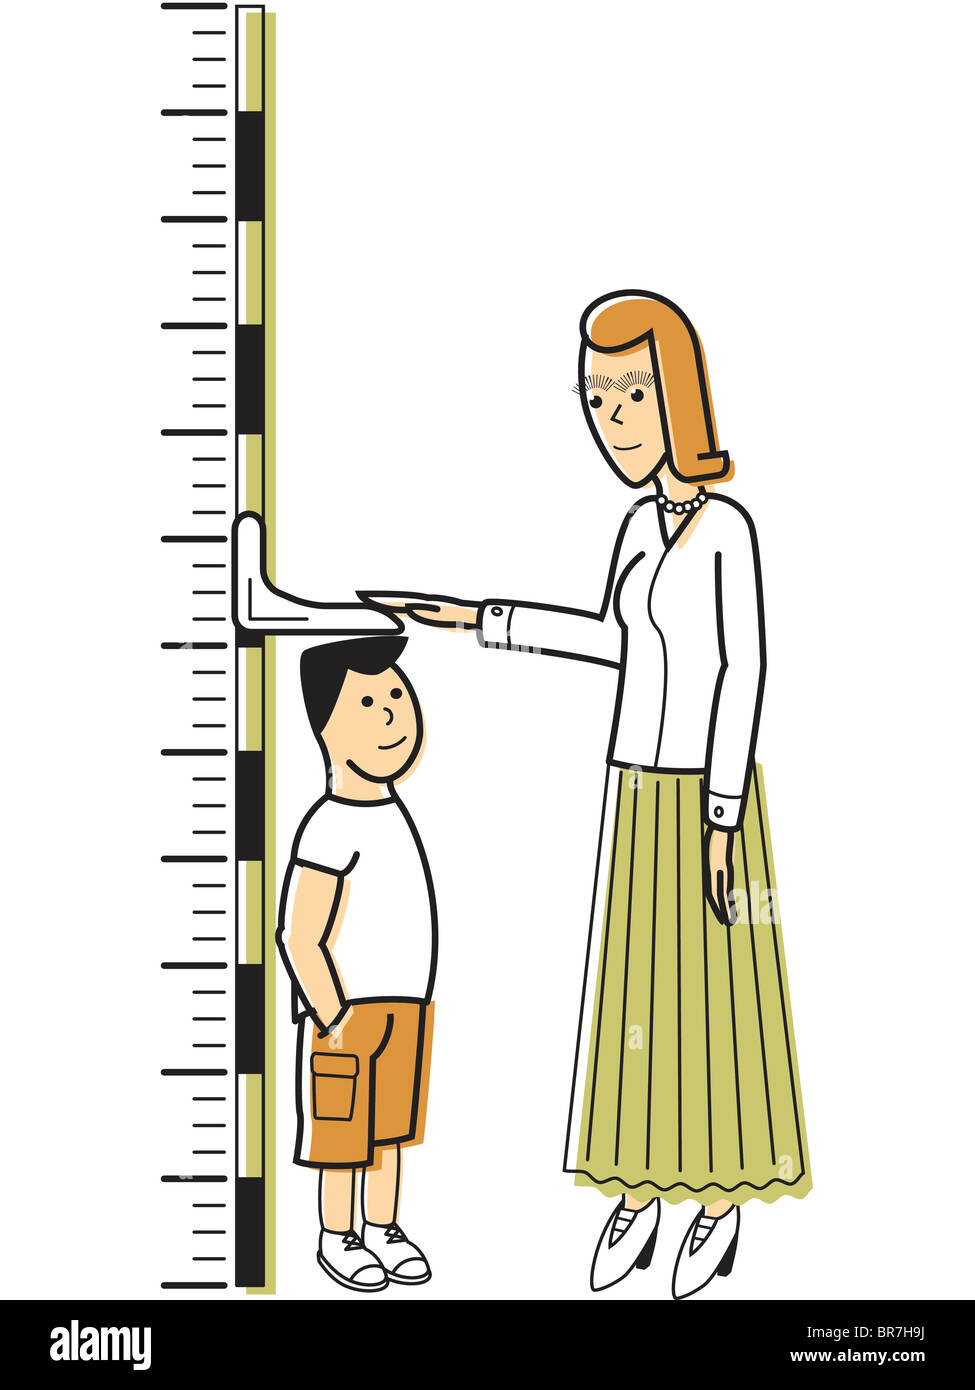 A Growth Chart